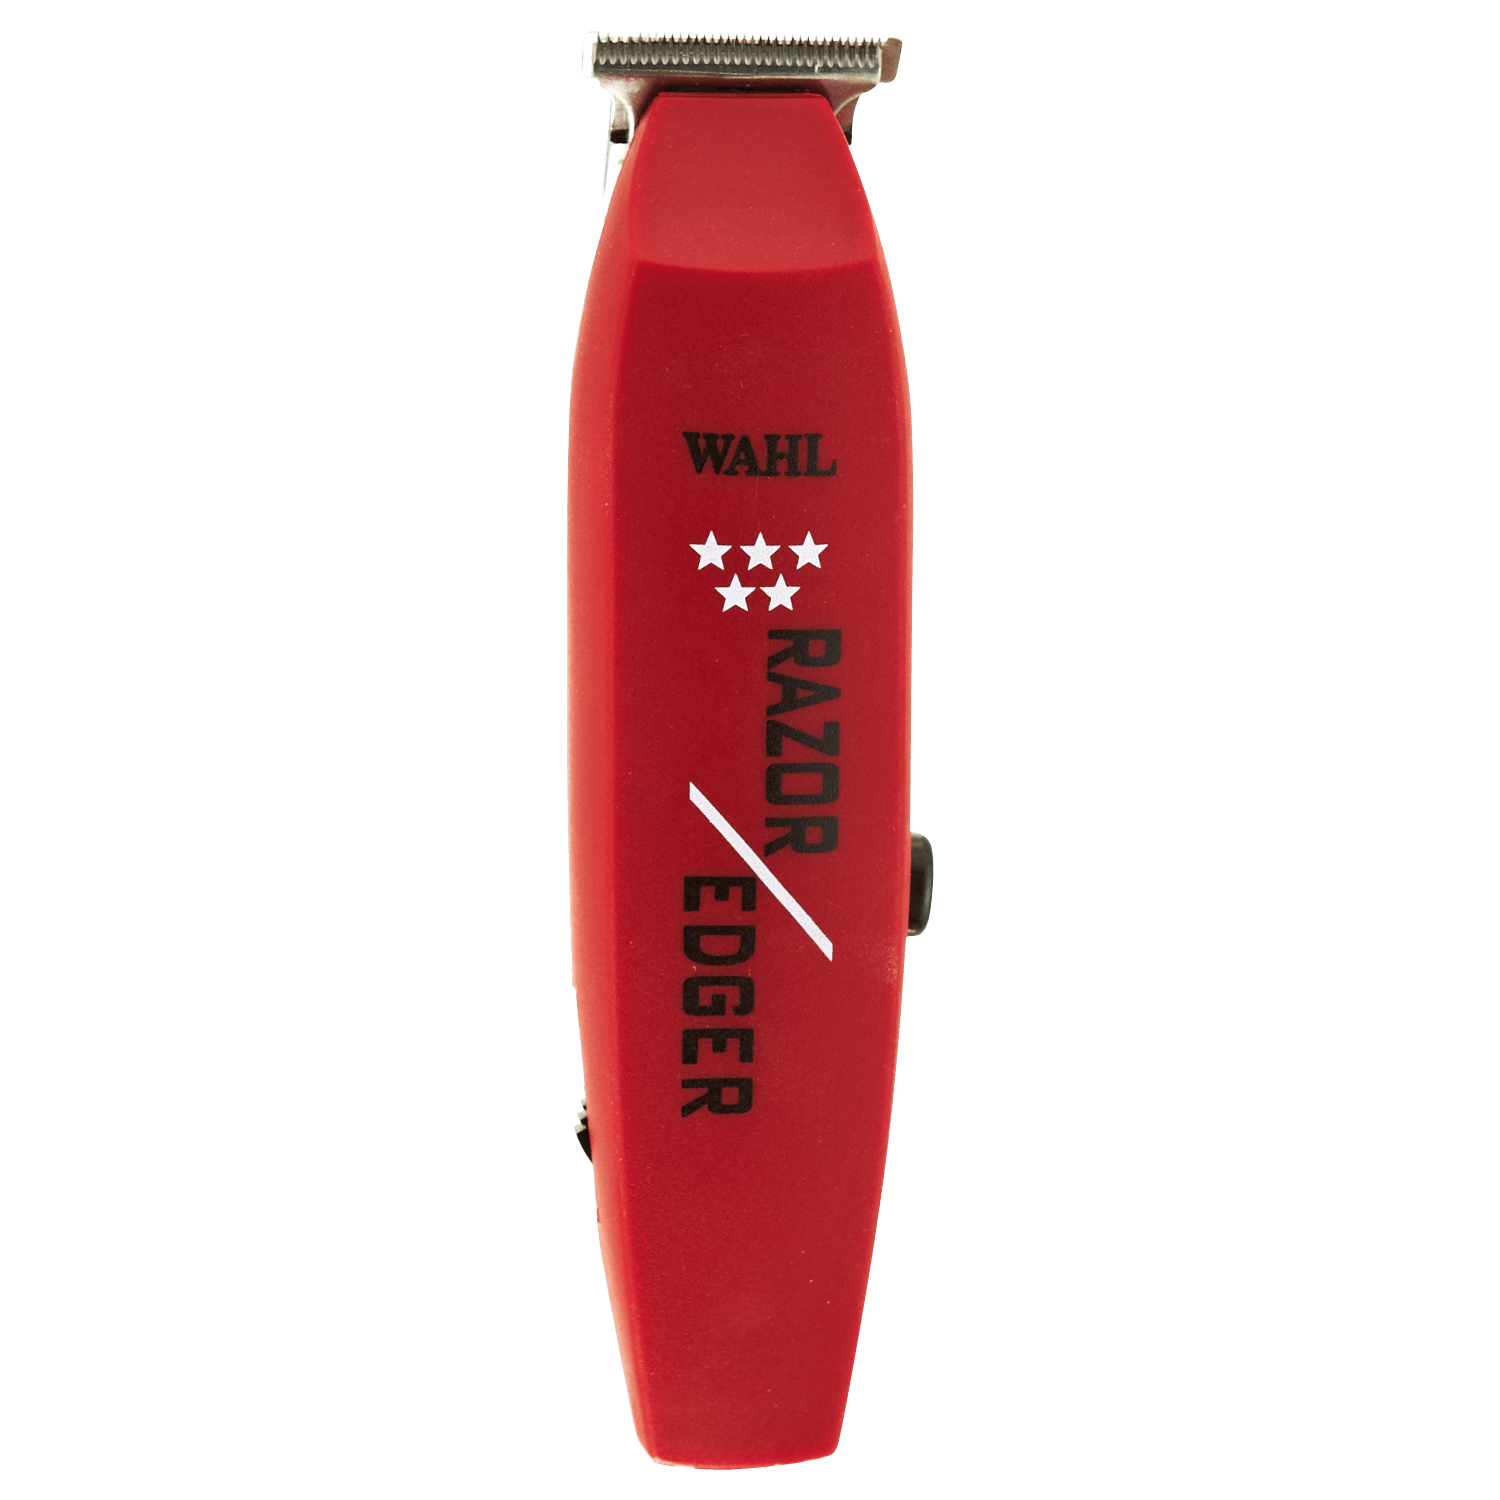 Wahl Professional Star Razor Edger #8051 Great for Barbers and Stylists Razor Close Trimming and Edging Accessories Included